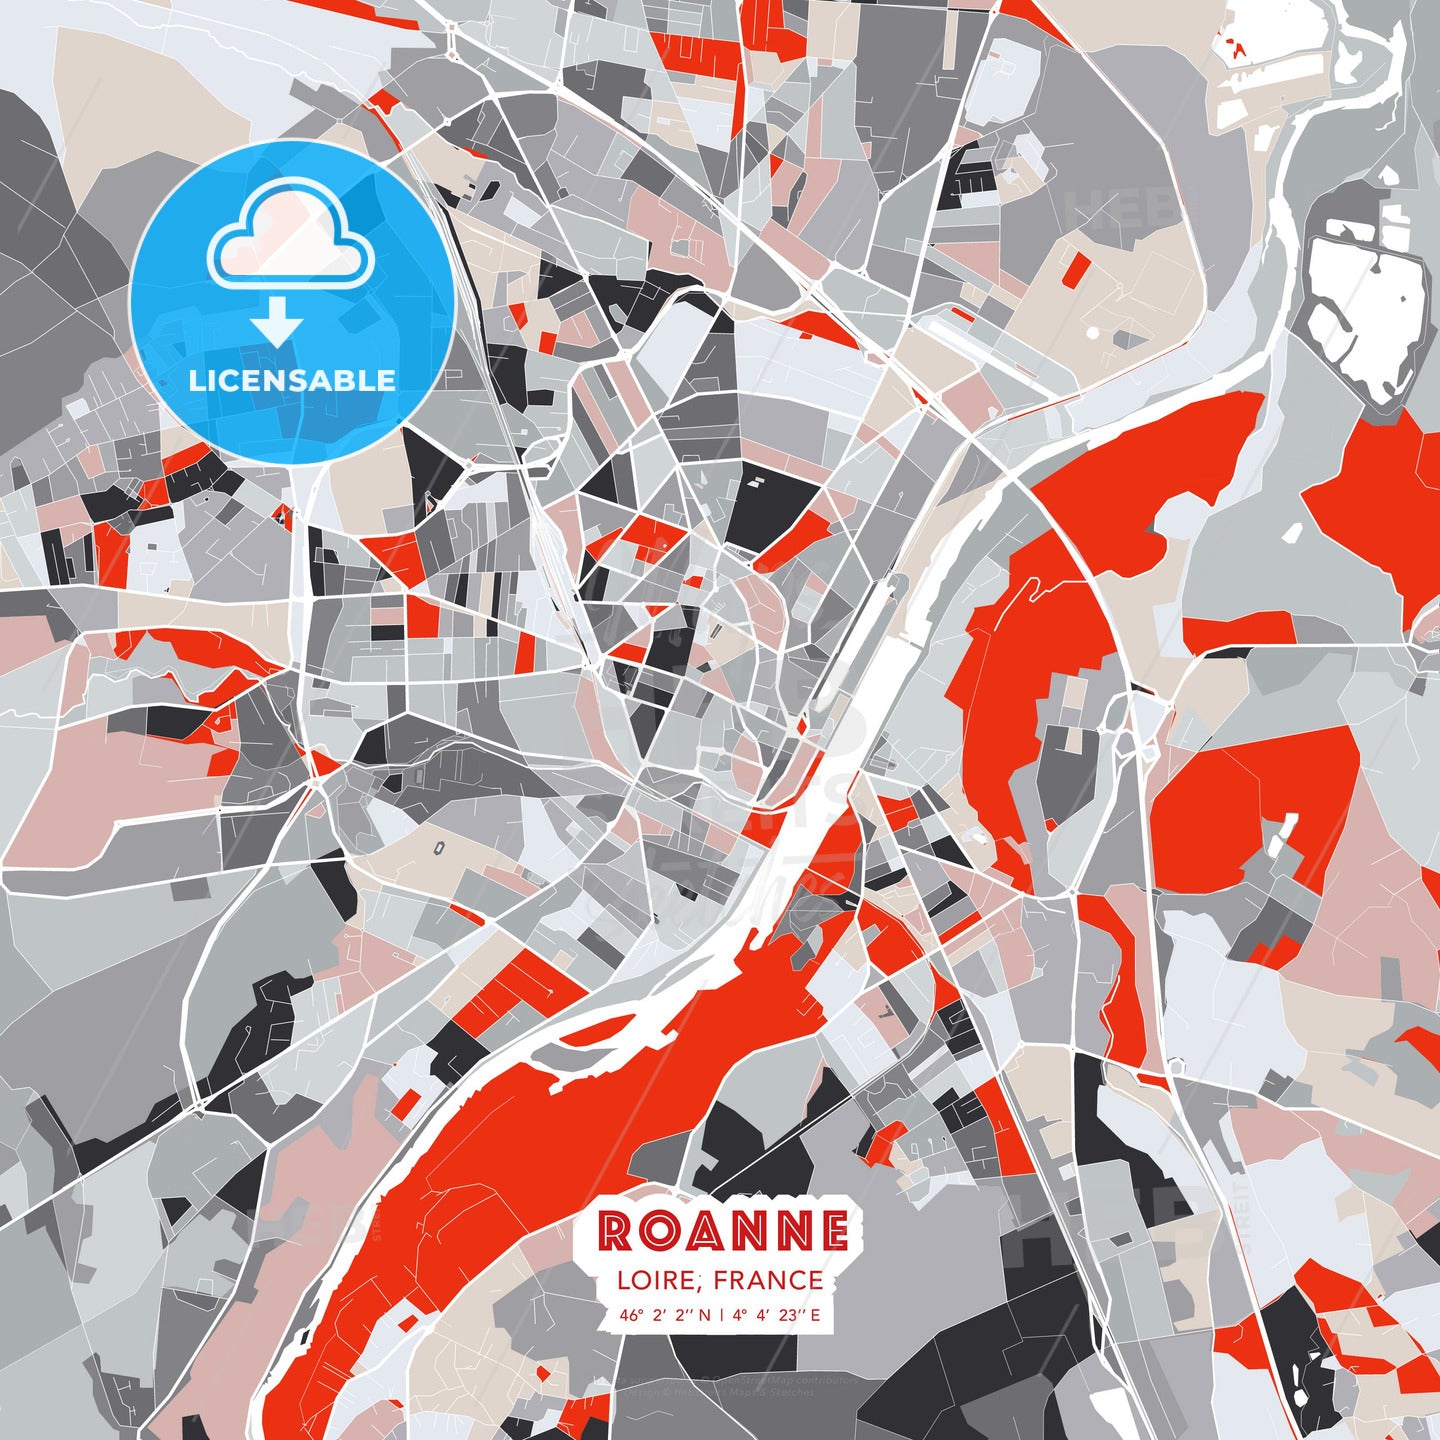 Roanne, Loire, France, modern map - HEBSTREITS Sketches